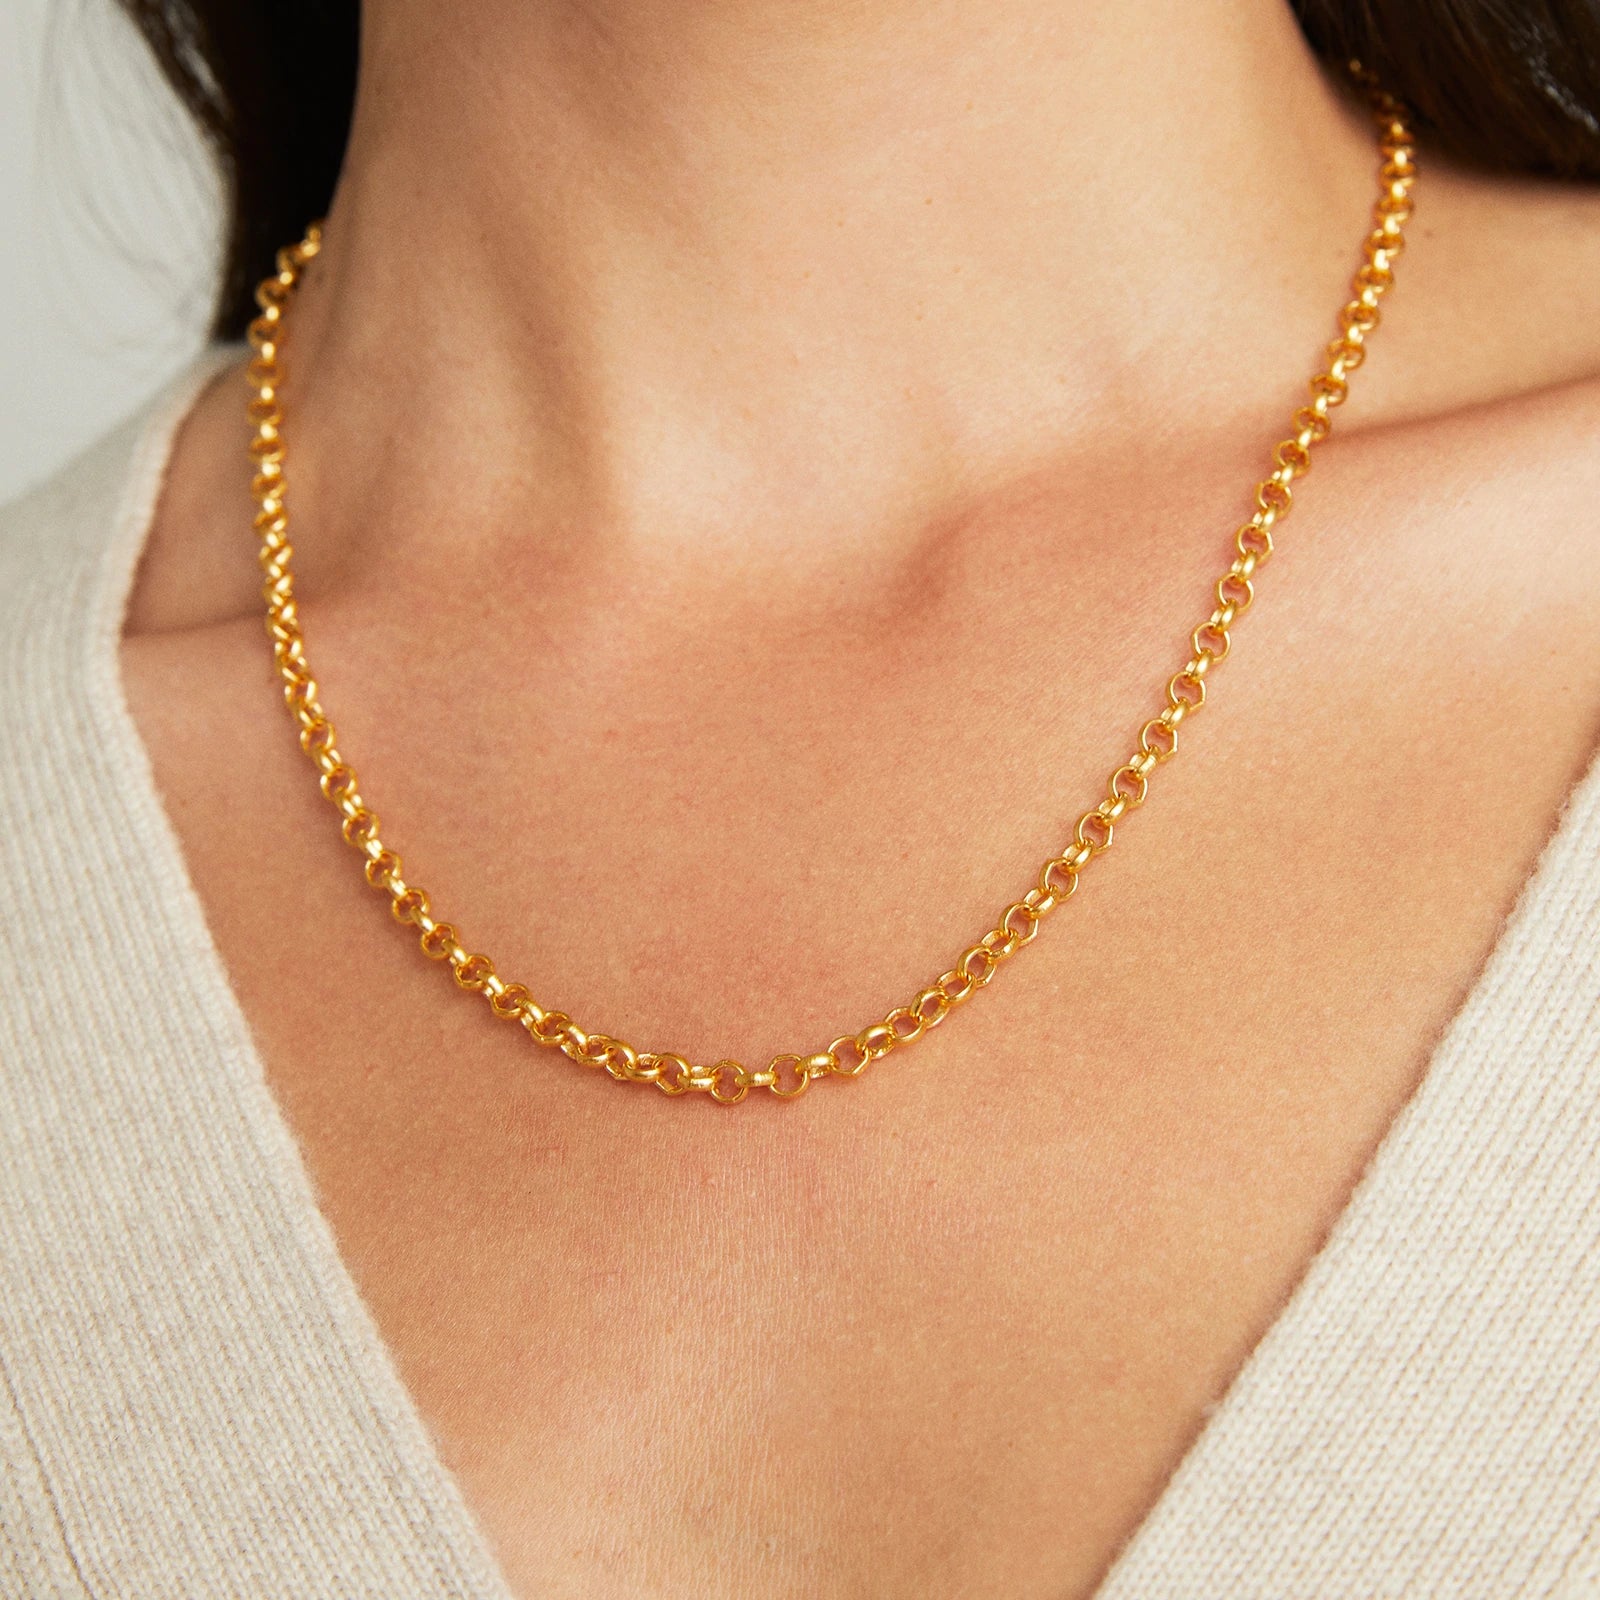 14k Gold Rolo Chain Necklace 6mm | Everyday Jewelry | Ethical Fine Jewelry